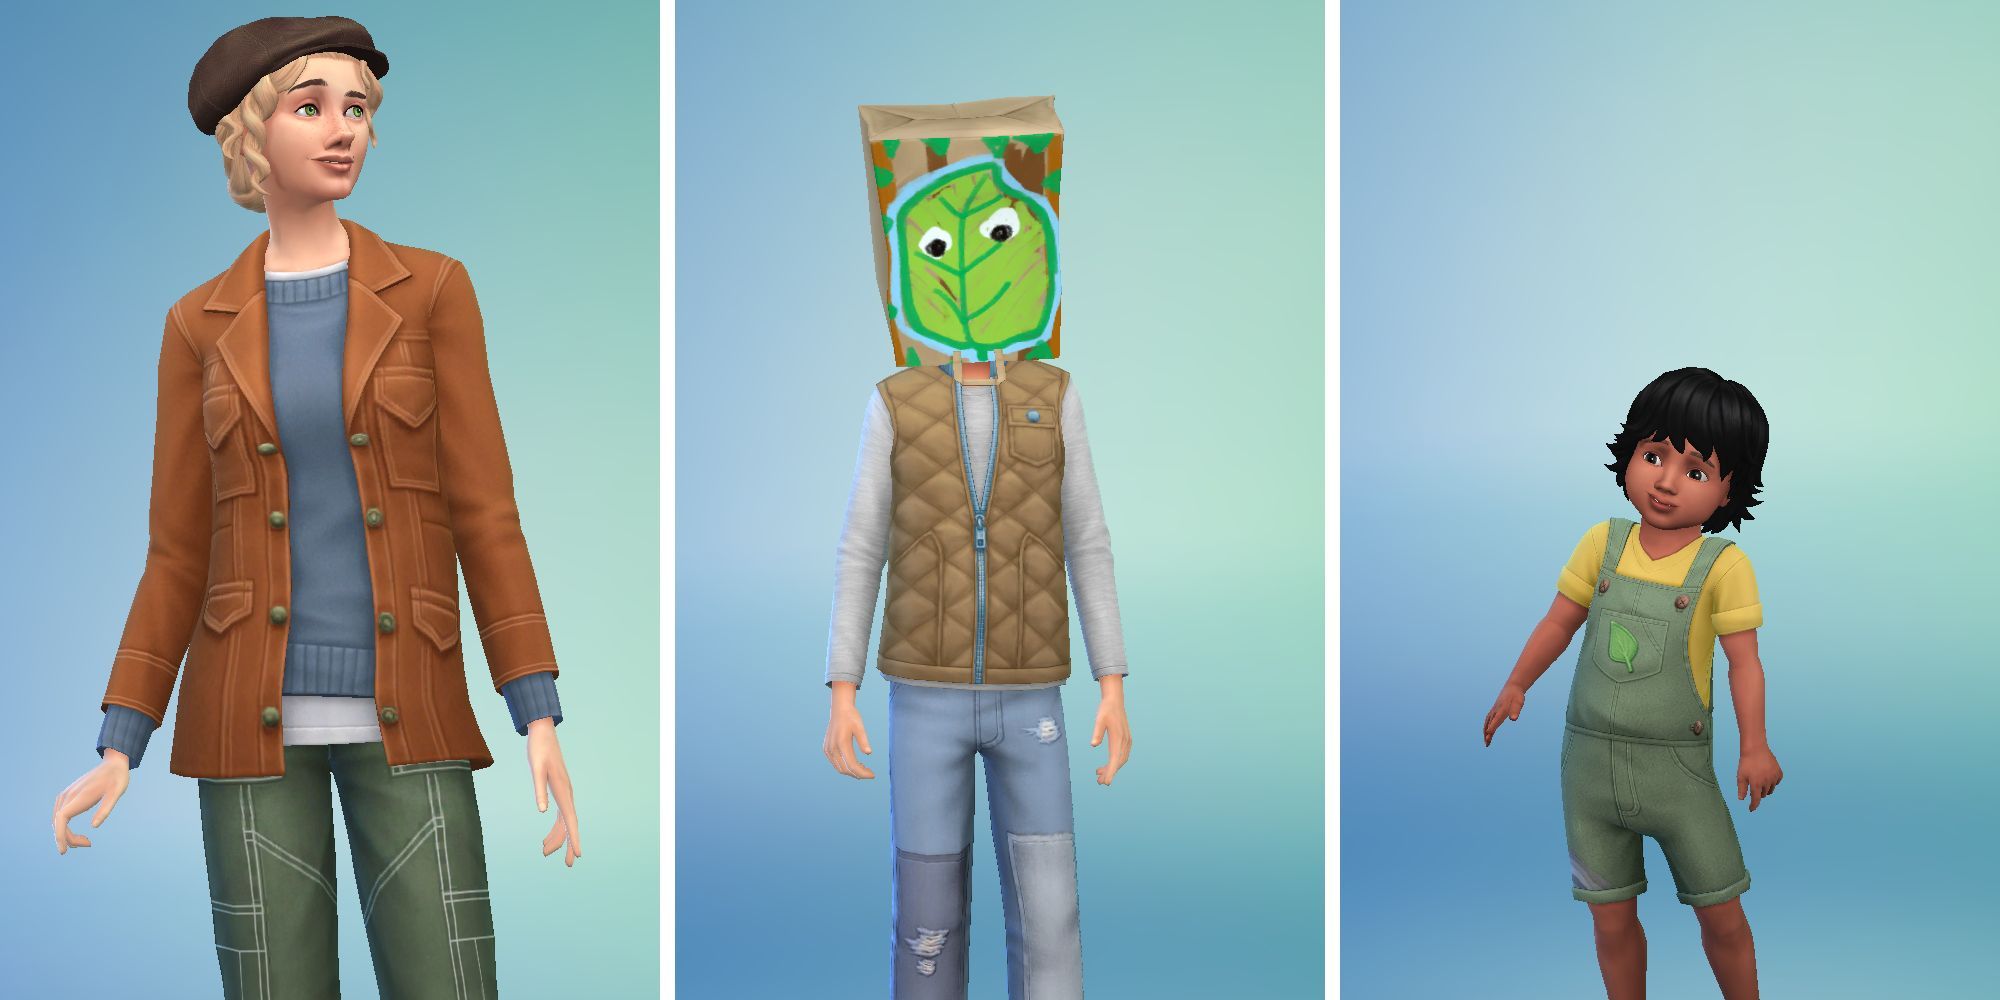 Three images of Sims in Sims 4 Create A Sim. One in a tan jacket, a child with a bag on their head, and a toddler in green overalls